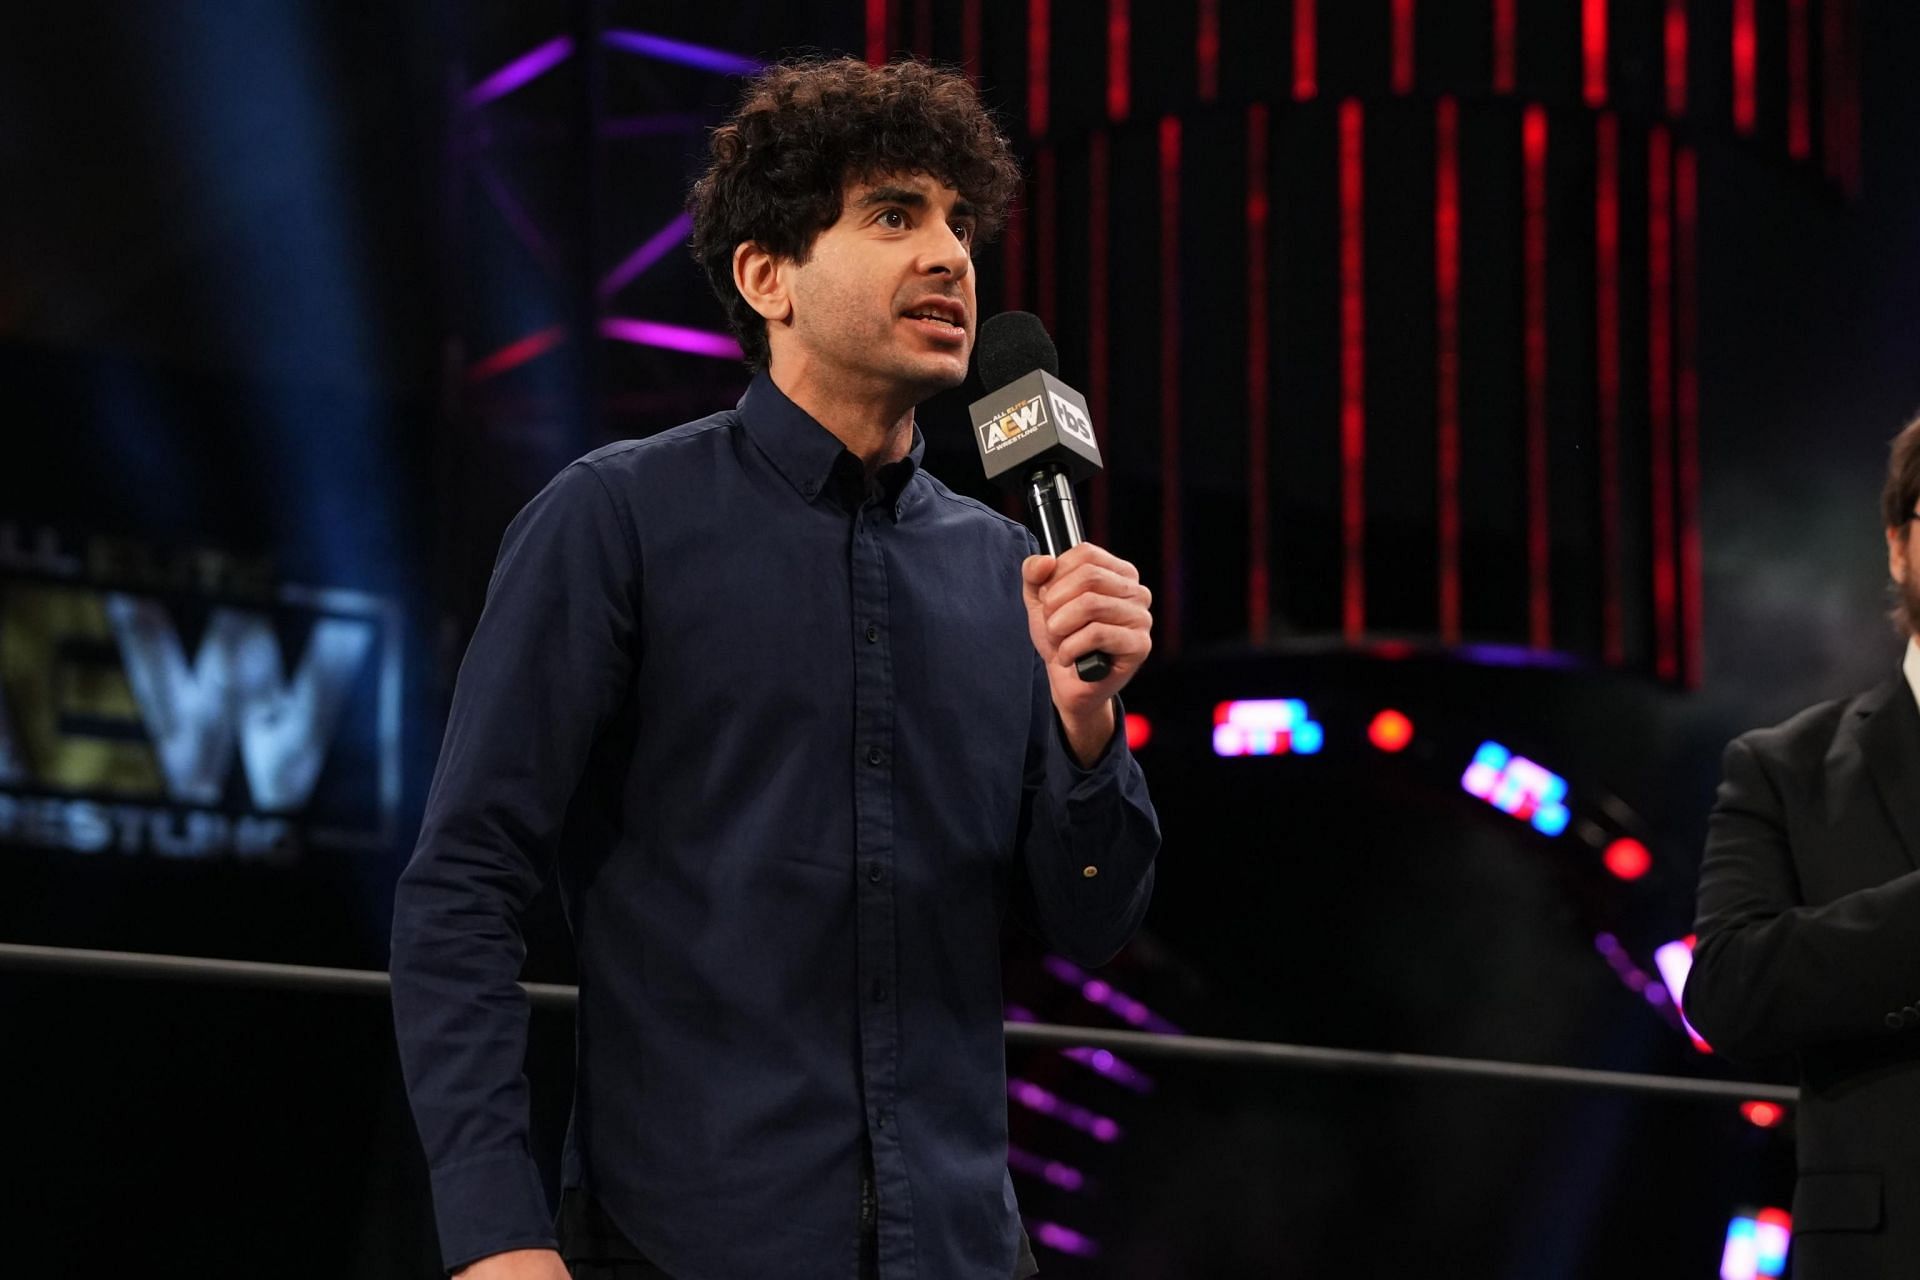 The All Elite Wrestling chief has signed several prominent free agents in recent months.